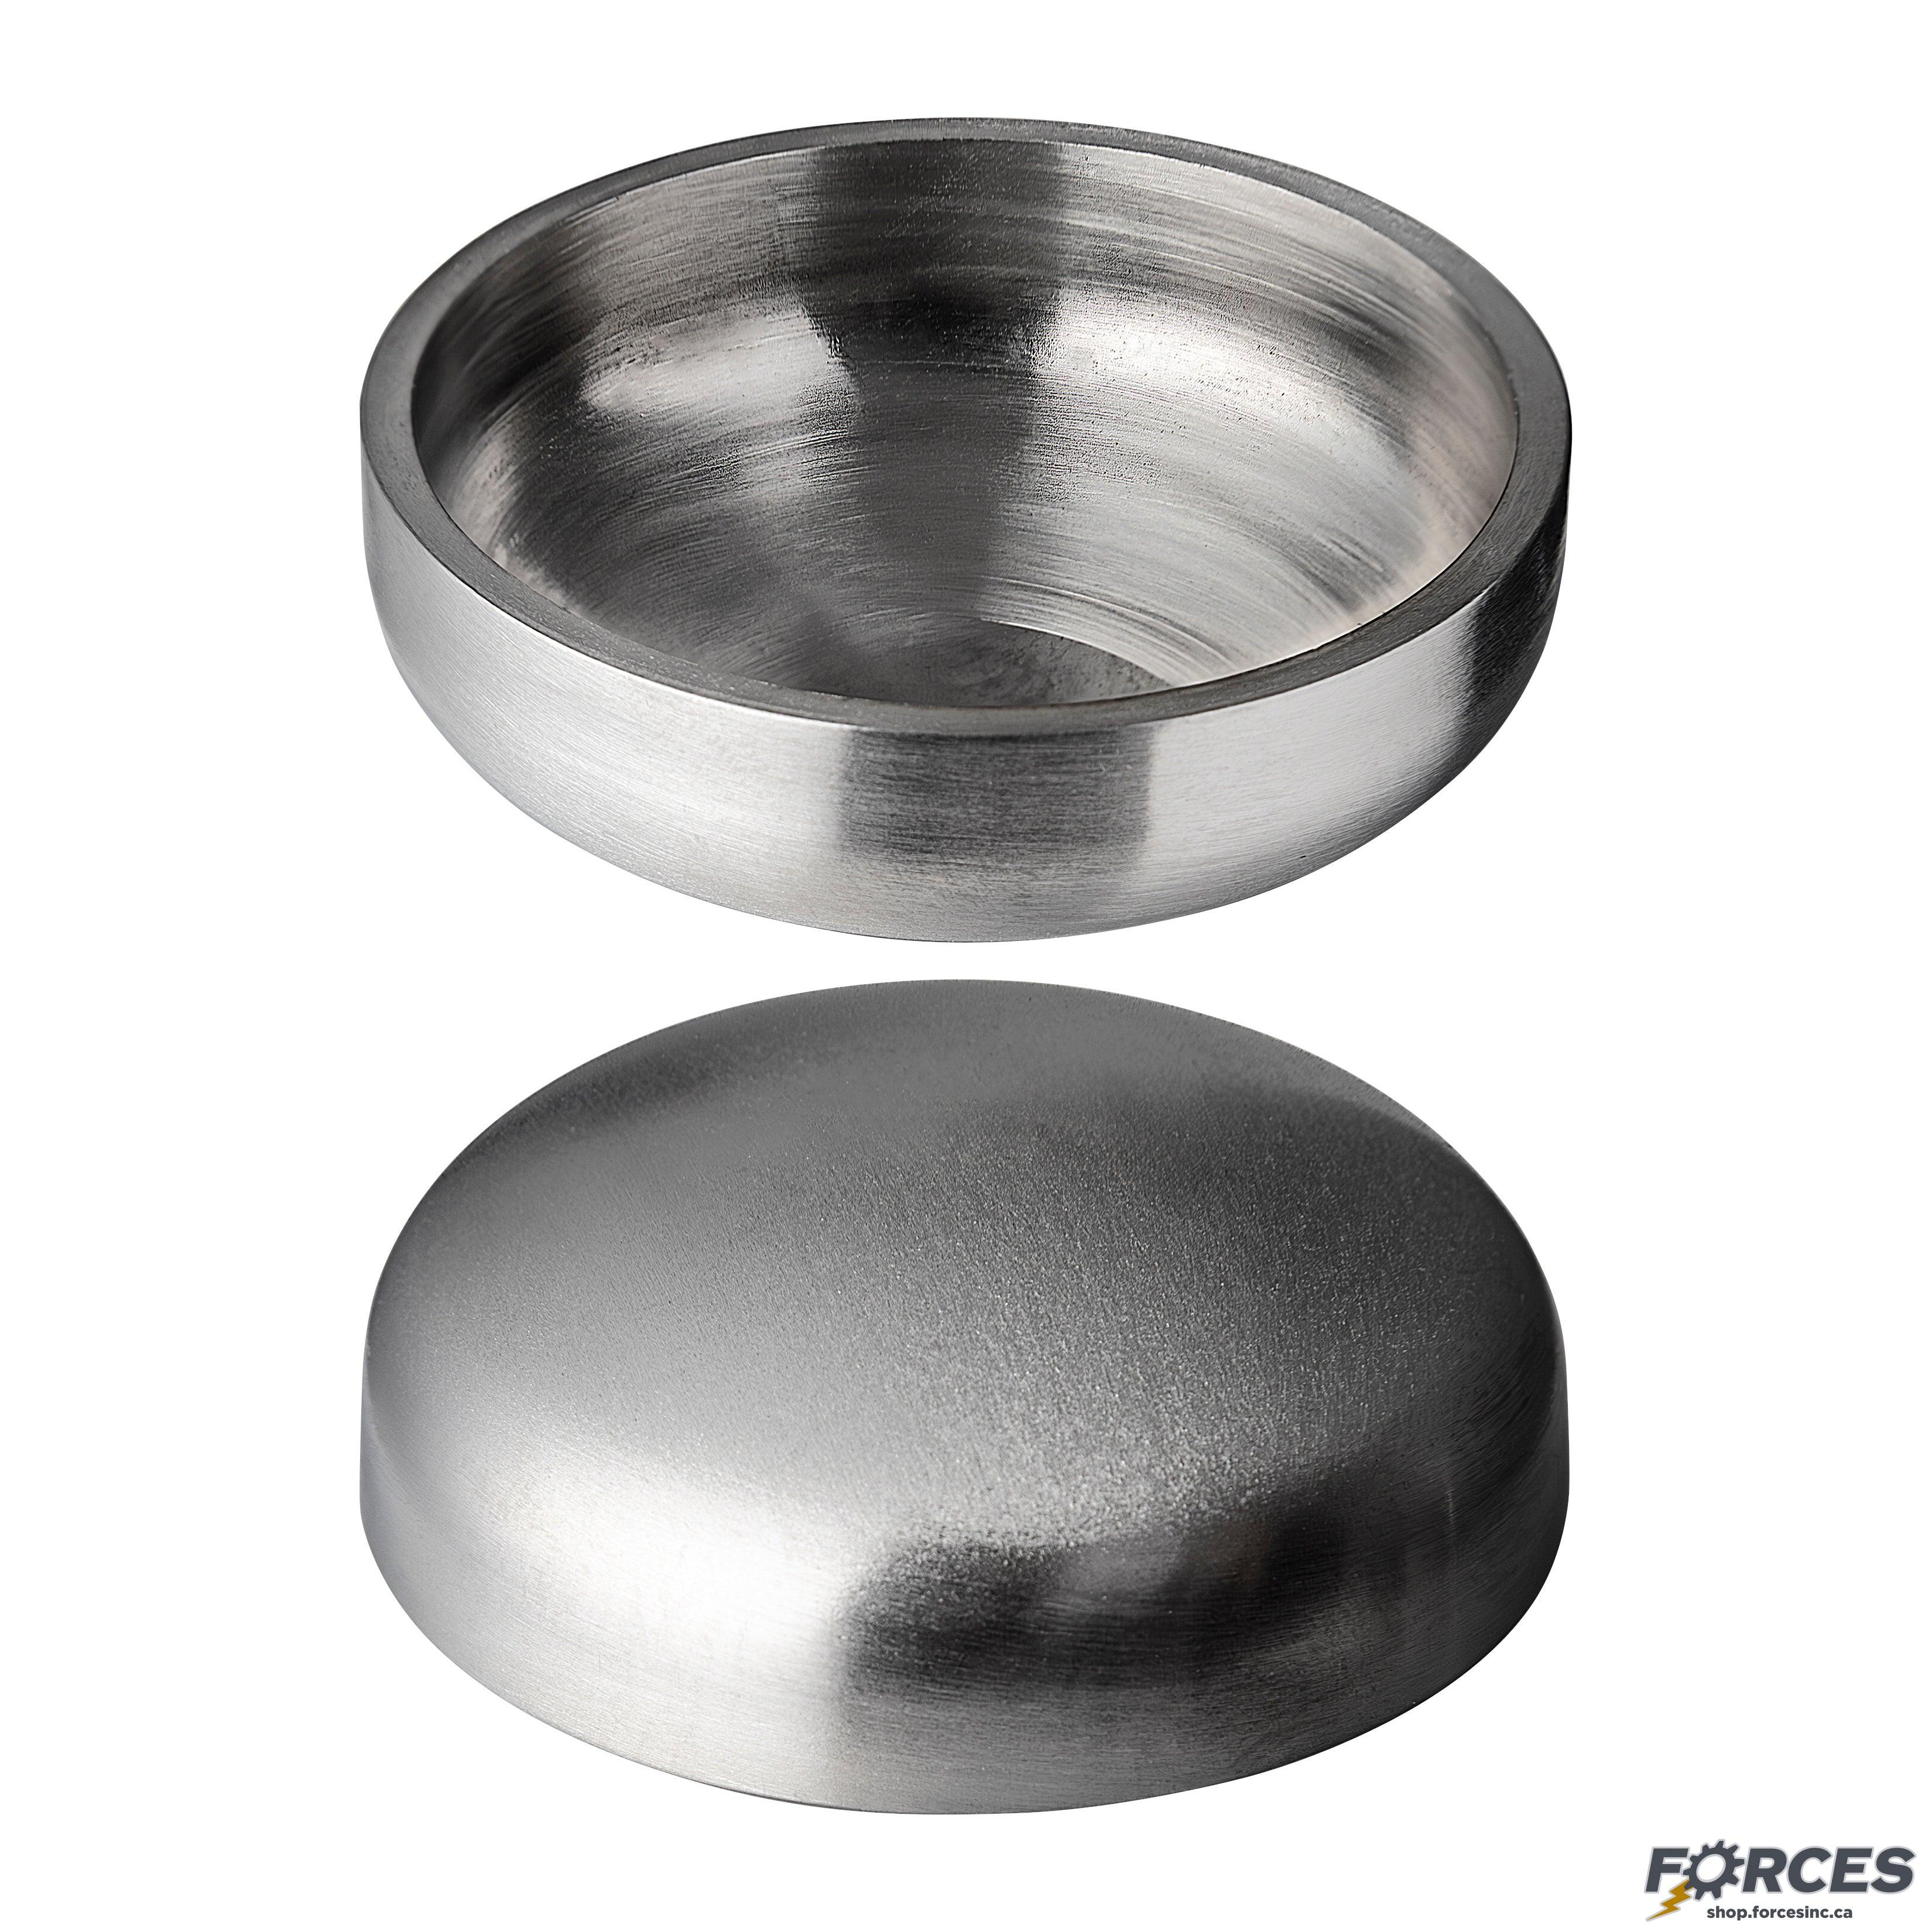 4" Butt Weld End Cap 16W - Stainless Steel 316 - Forces Inc